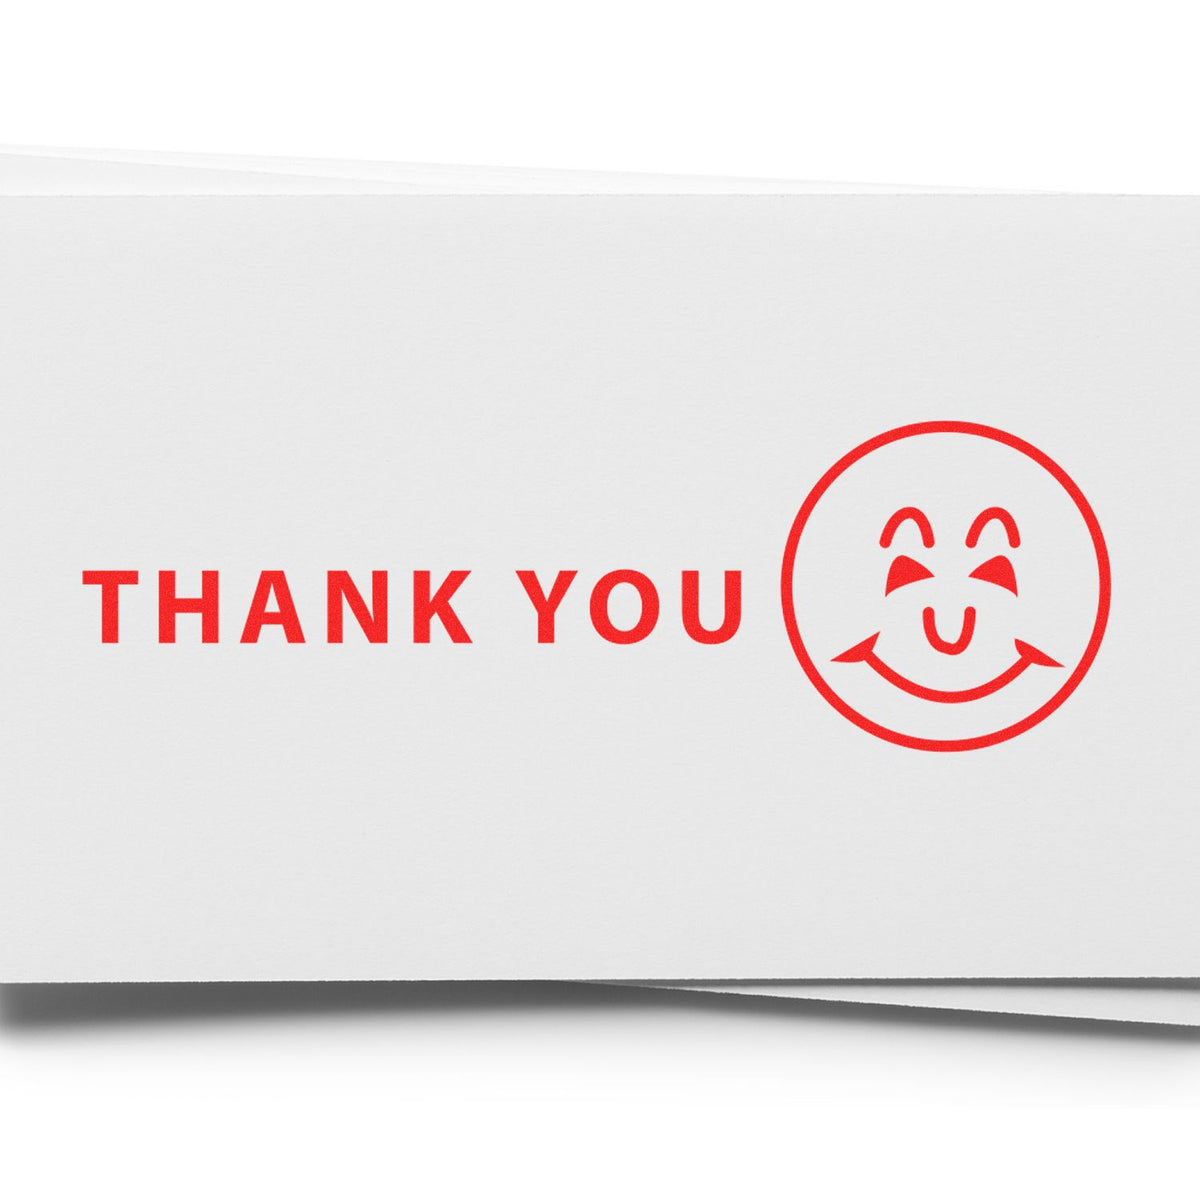 Thank You with Smiley Rubber Stamp In Use Photo